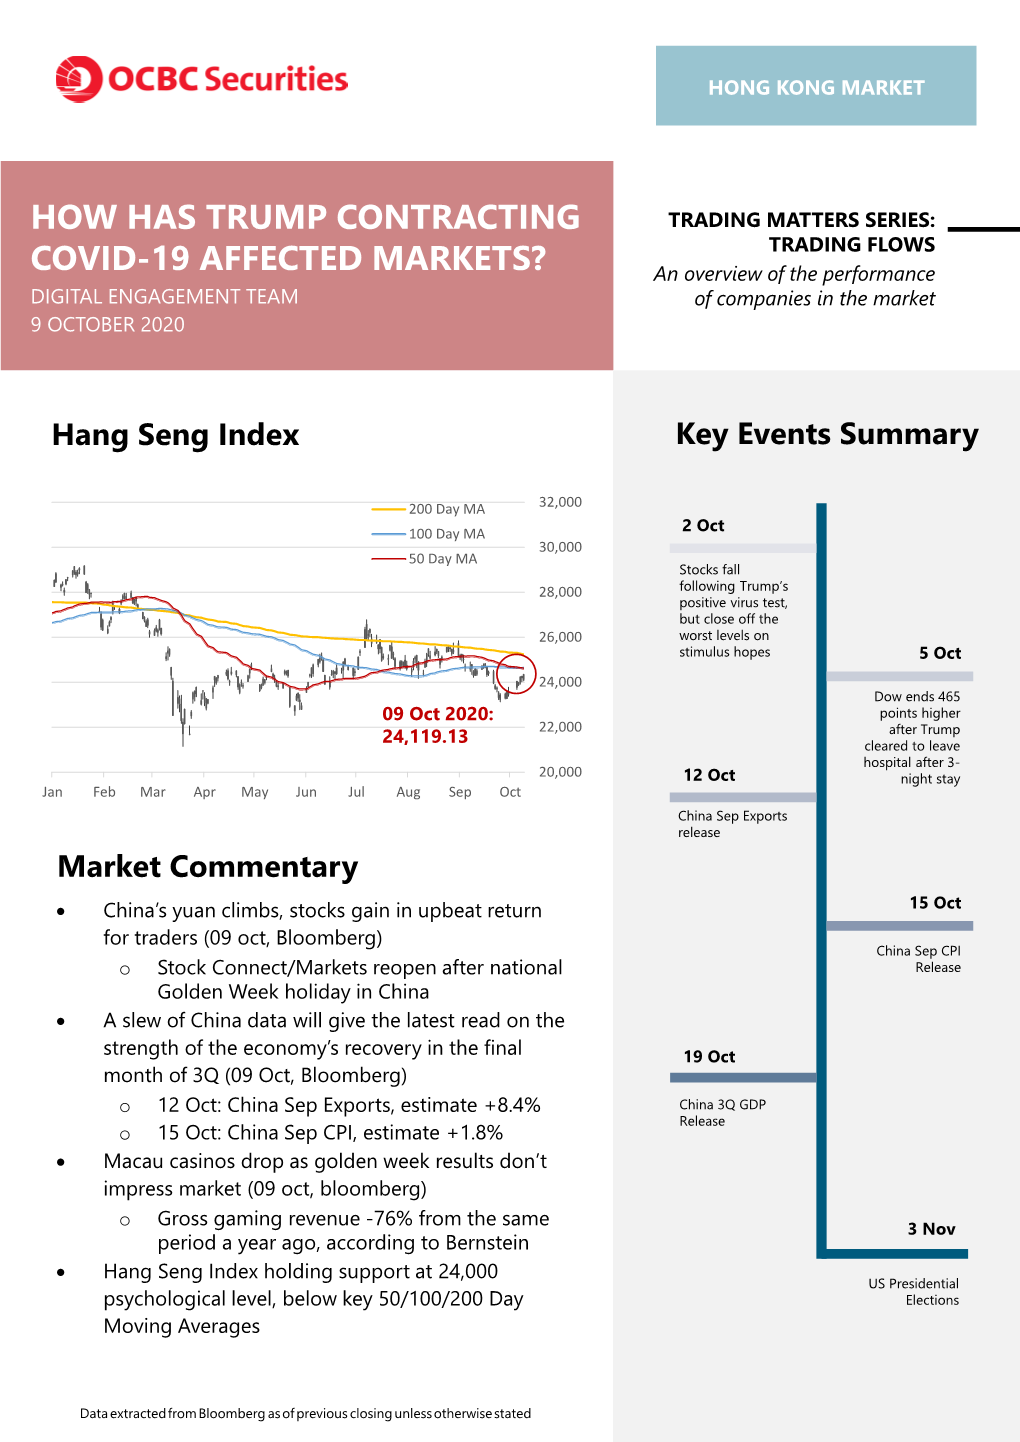 How Has Trump Contracting Covid-19 Affected Markets?